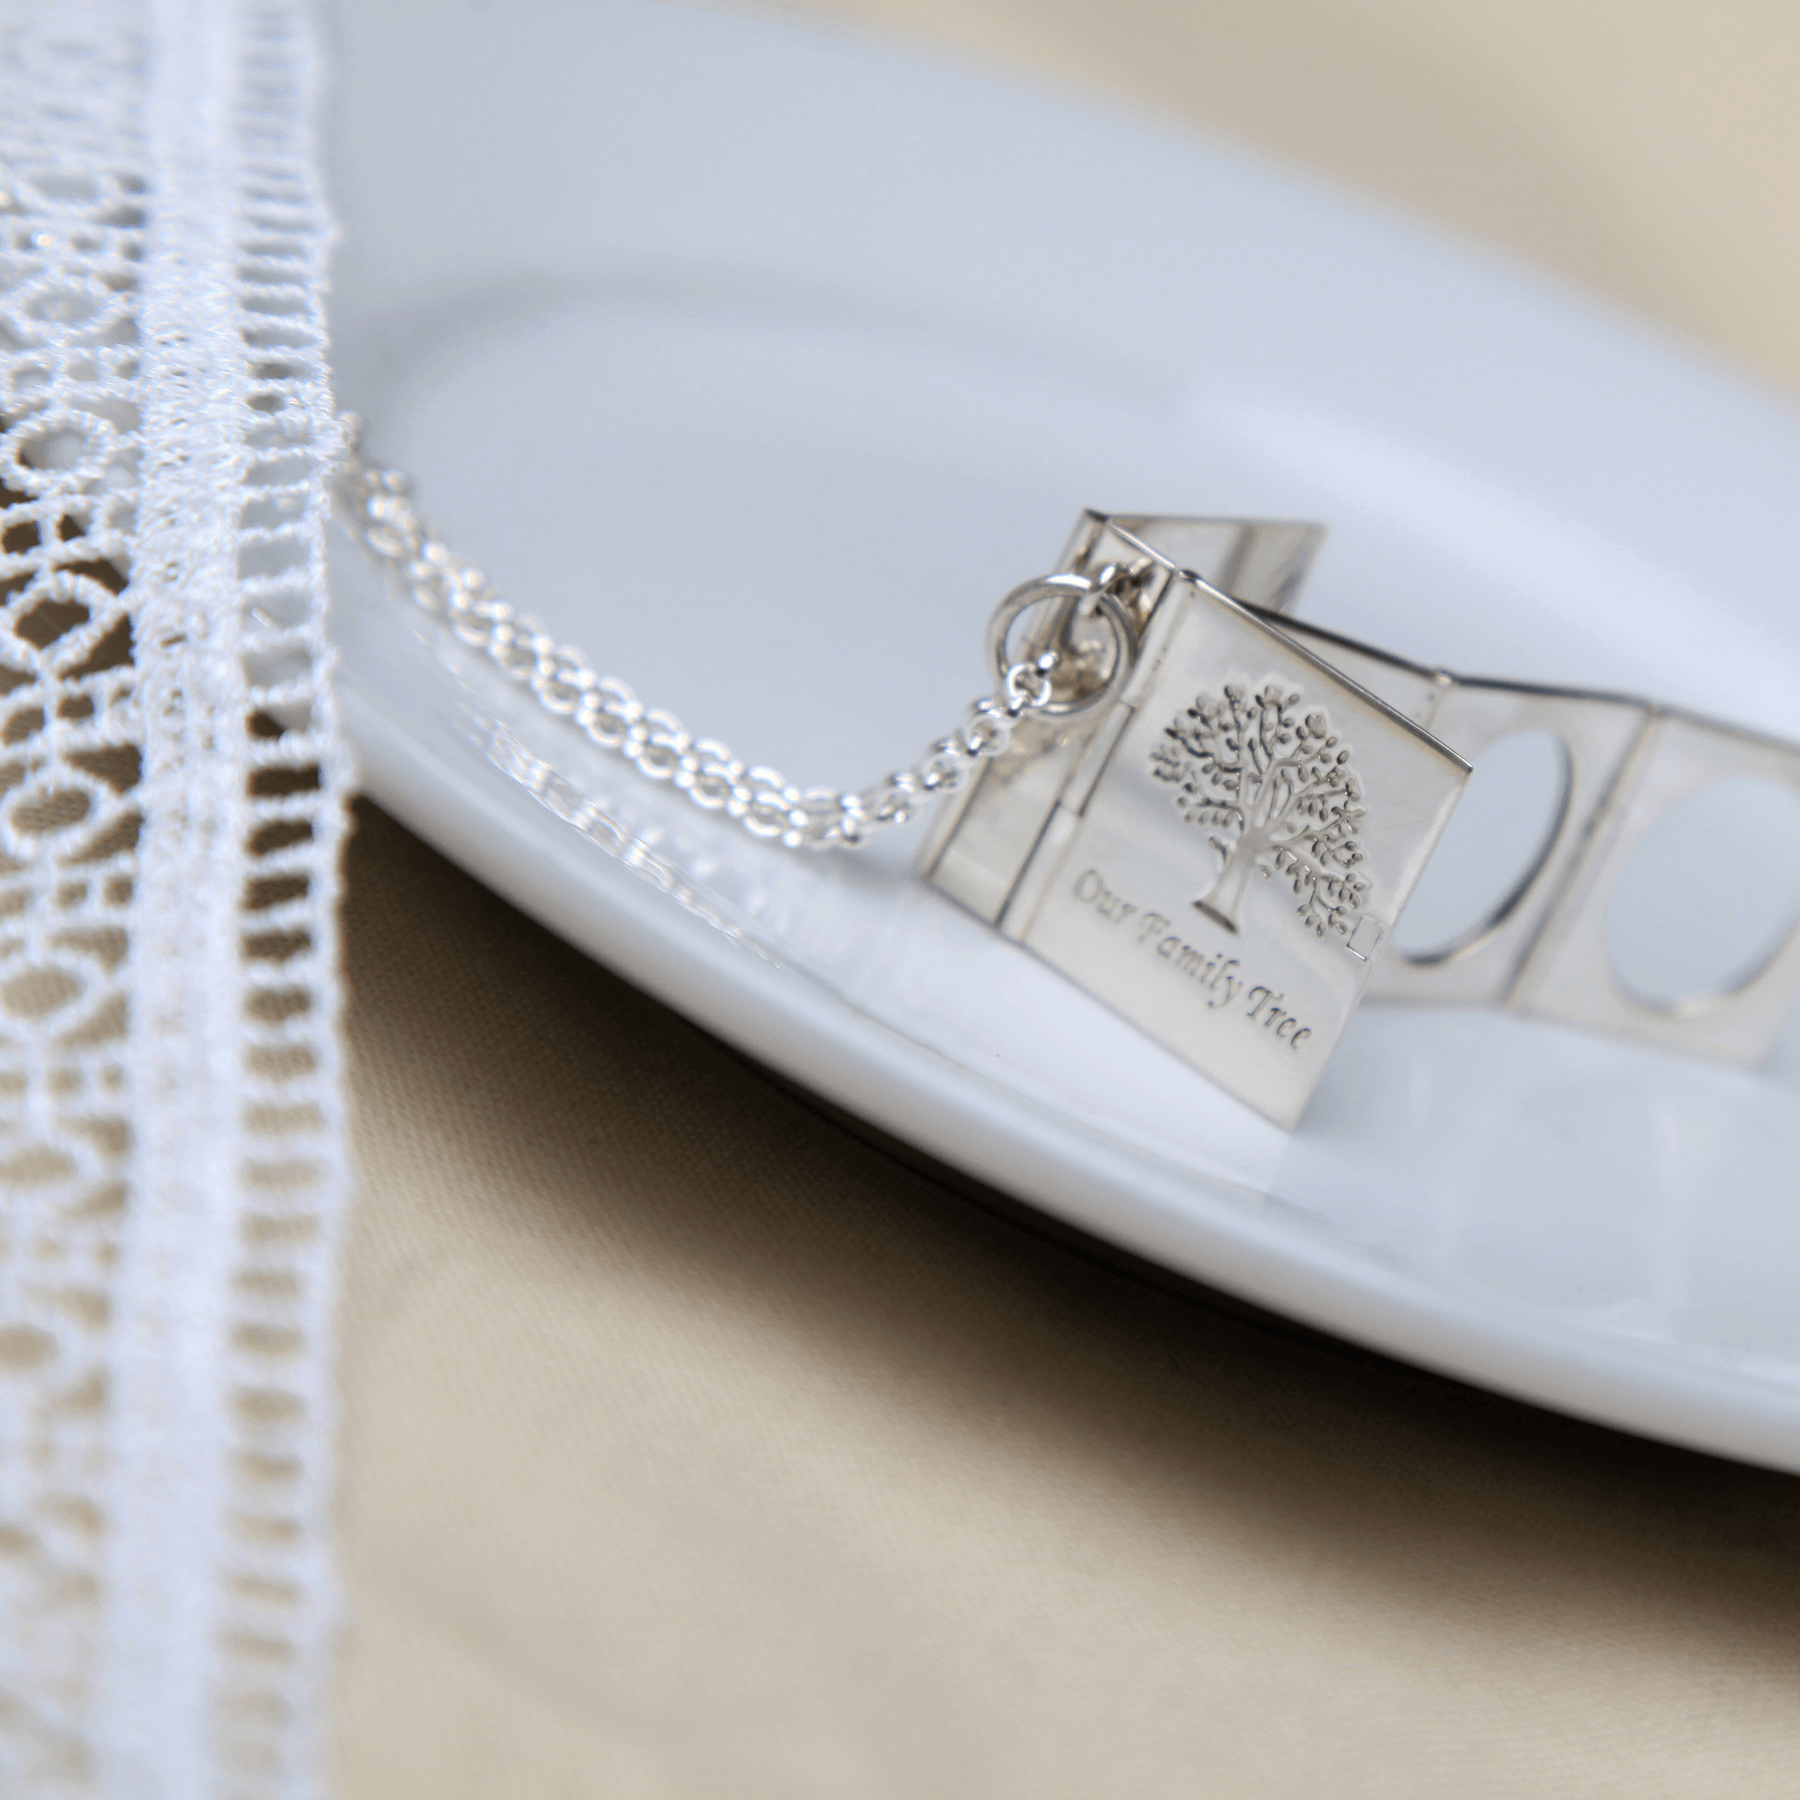 Photo showing a 925 sterling silver 10 photo Family Tree book album locket placing on a plate.